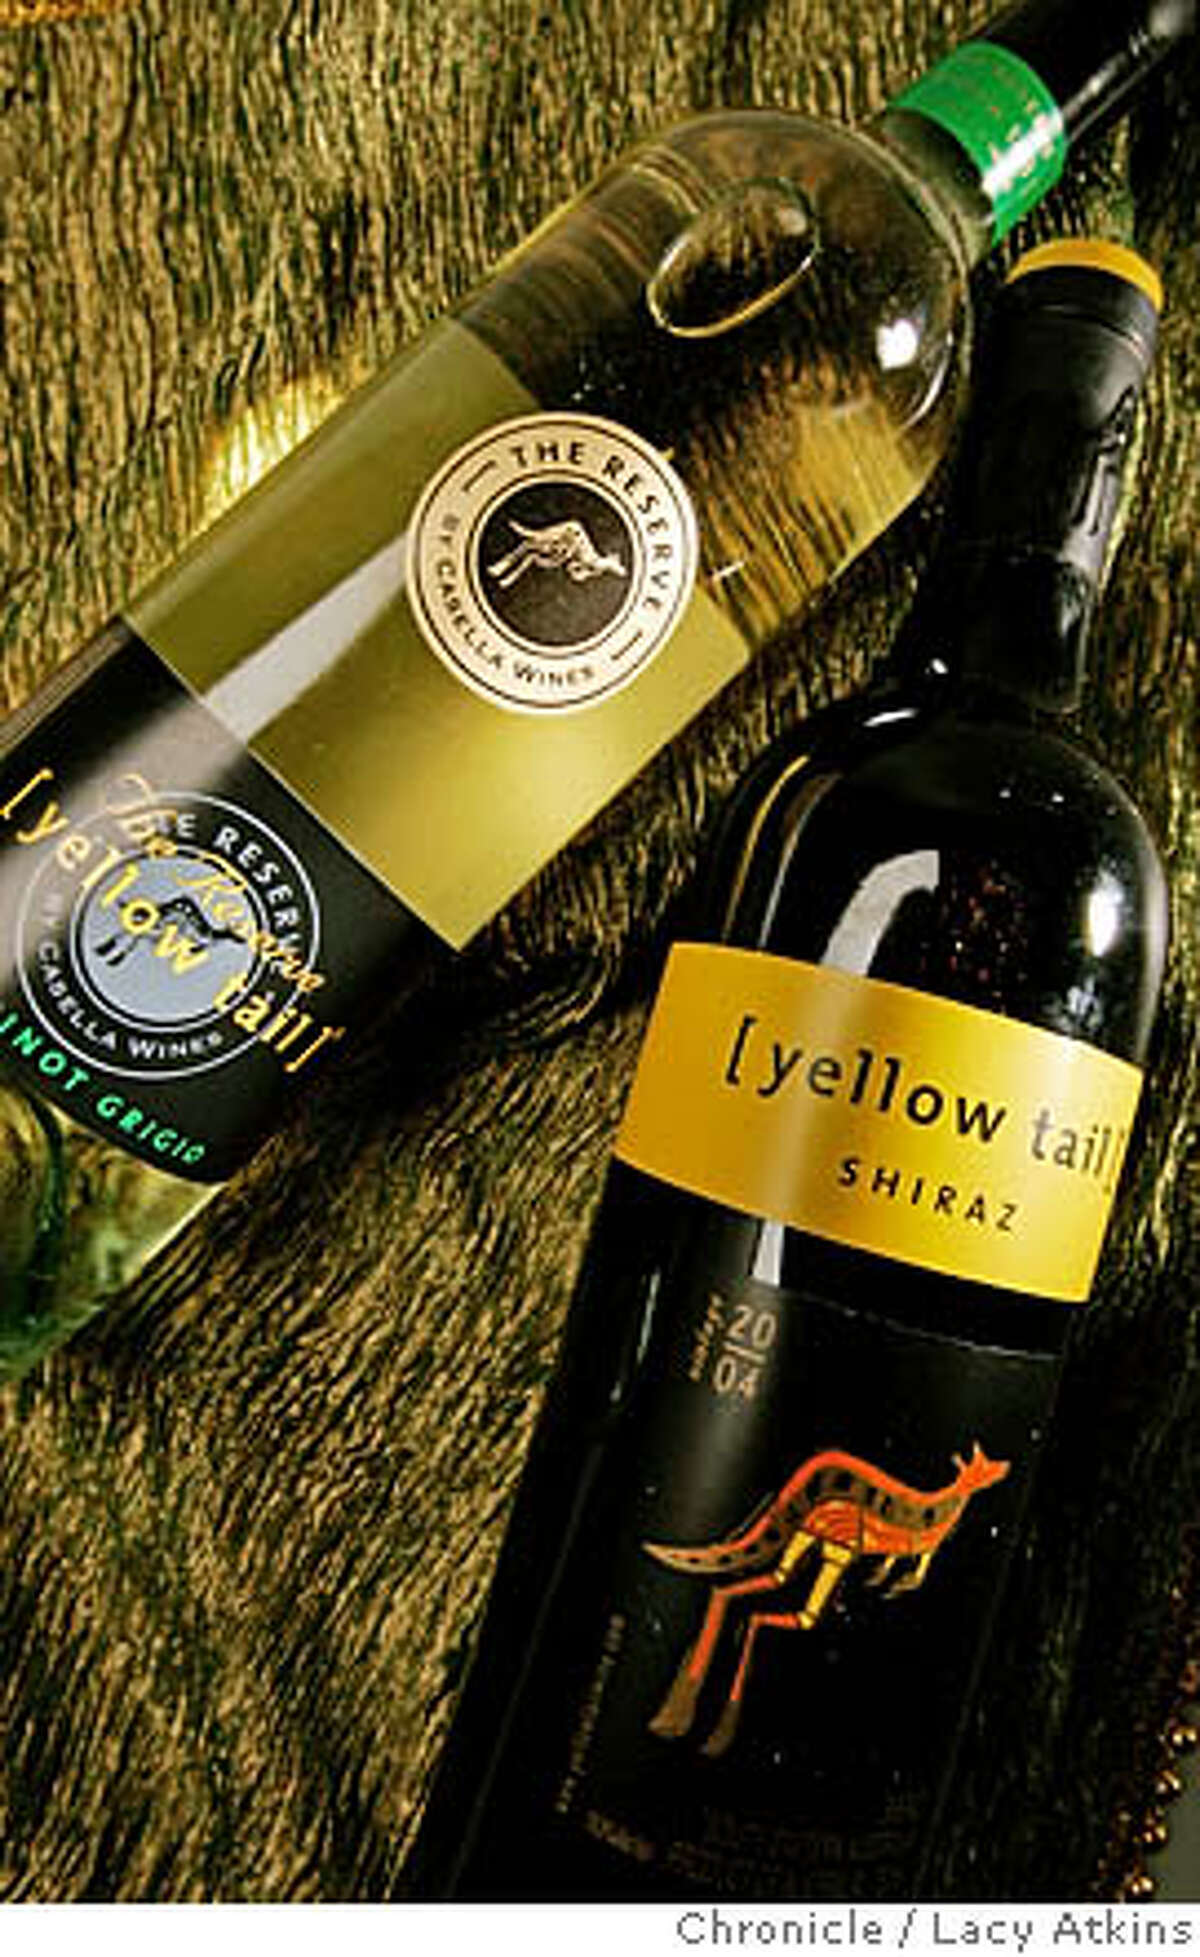 For a story on Yellowtail wines, we need a bottle shot. Dec. 29 2005 Photo By Lacy Atkins